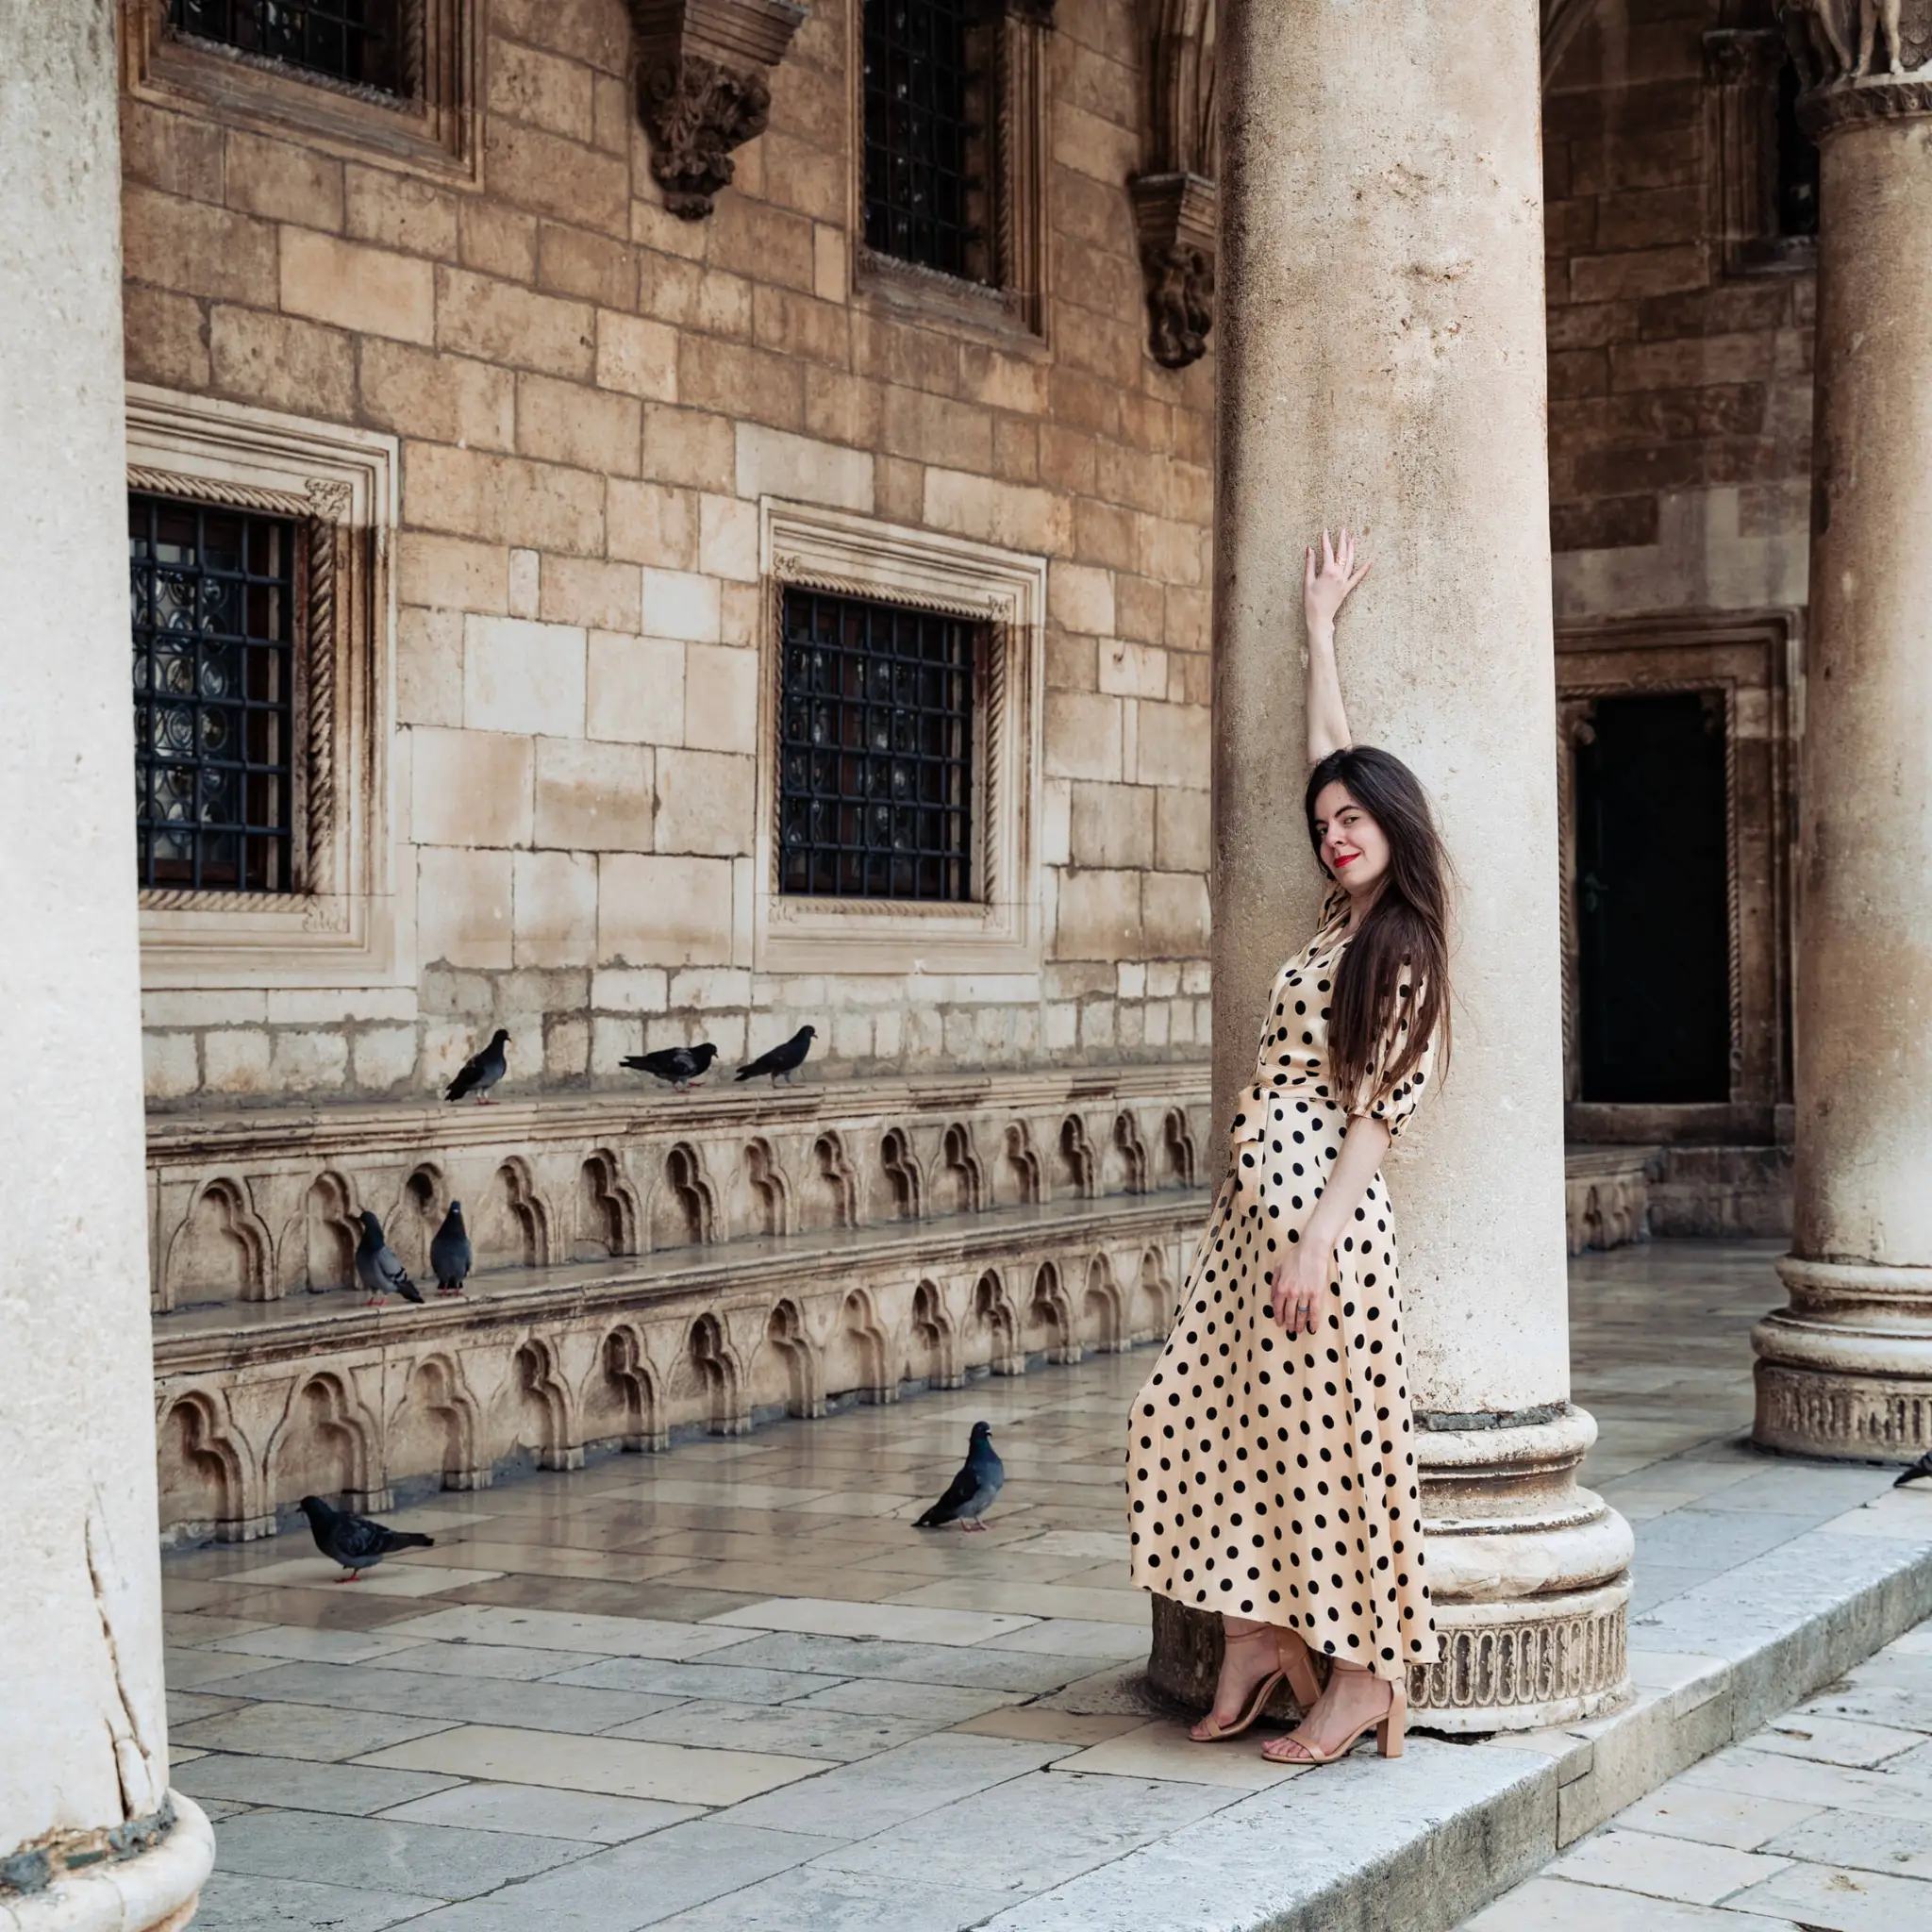 solo photoshoot in dubrovnik